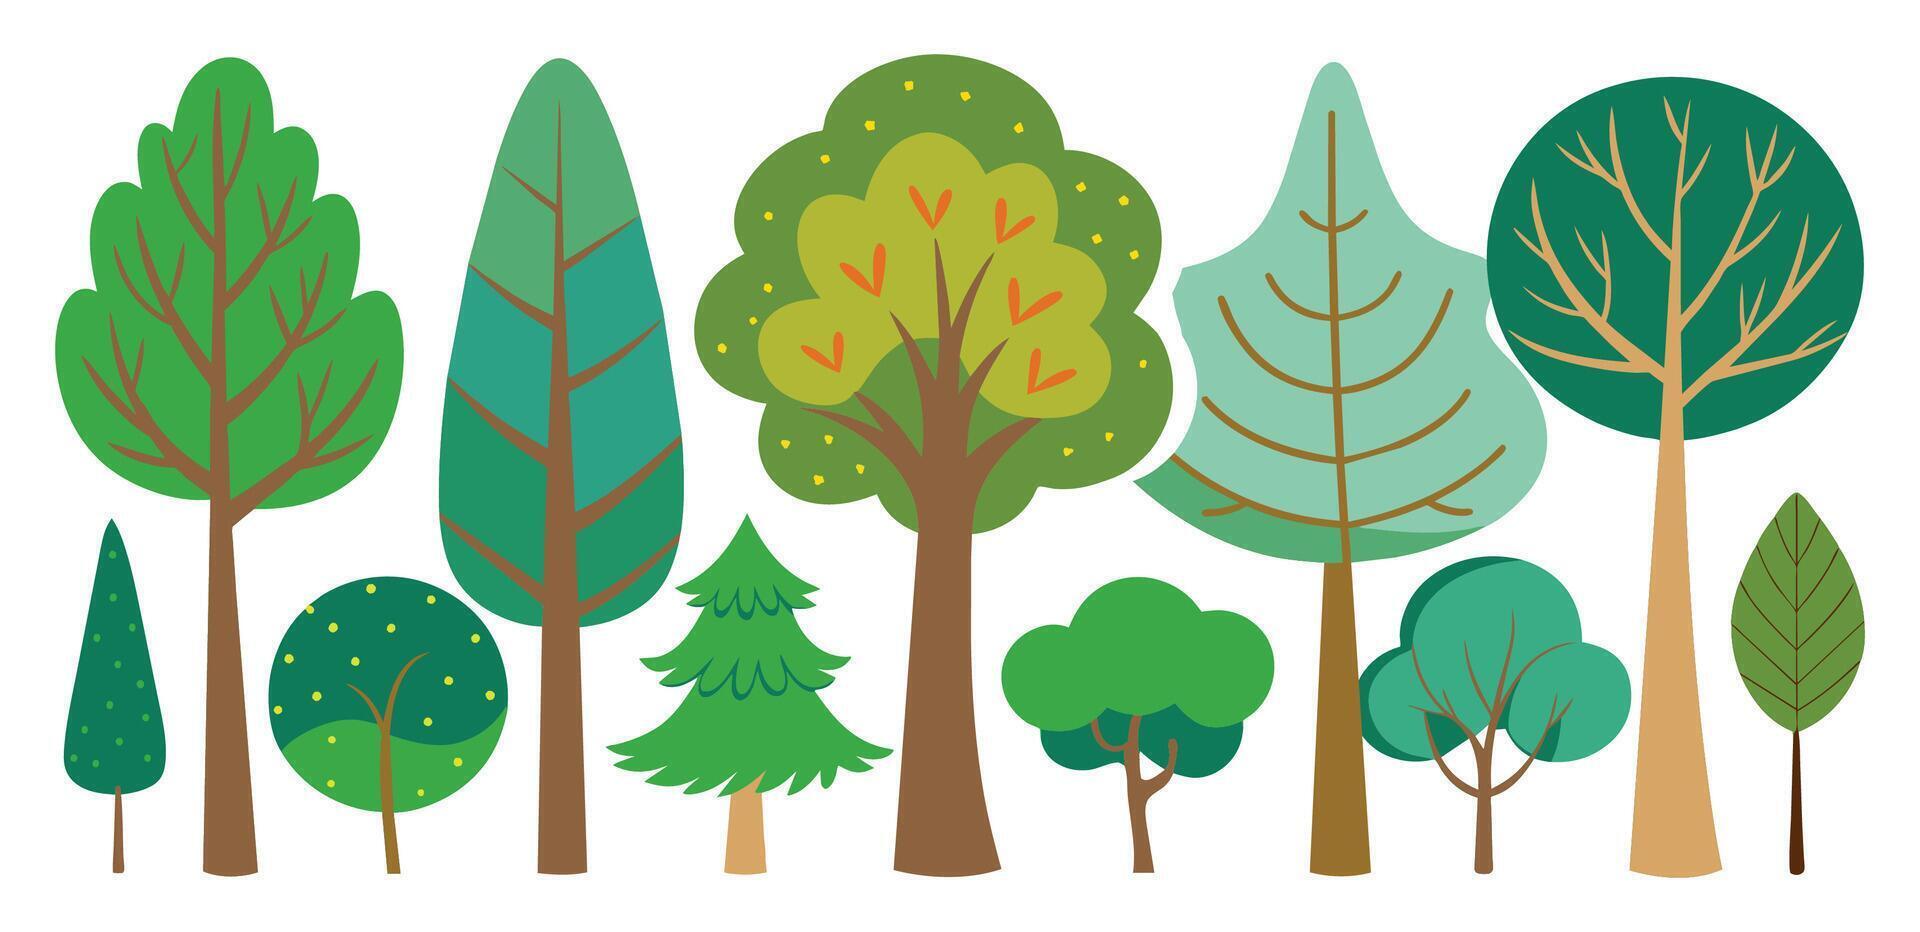 hand drawn trees collection set, illustration vector for infographic or other uses